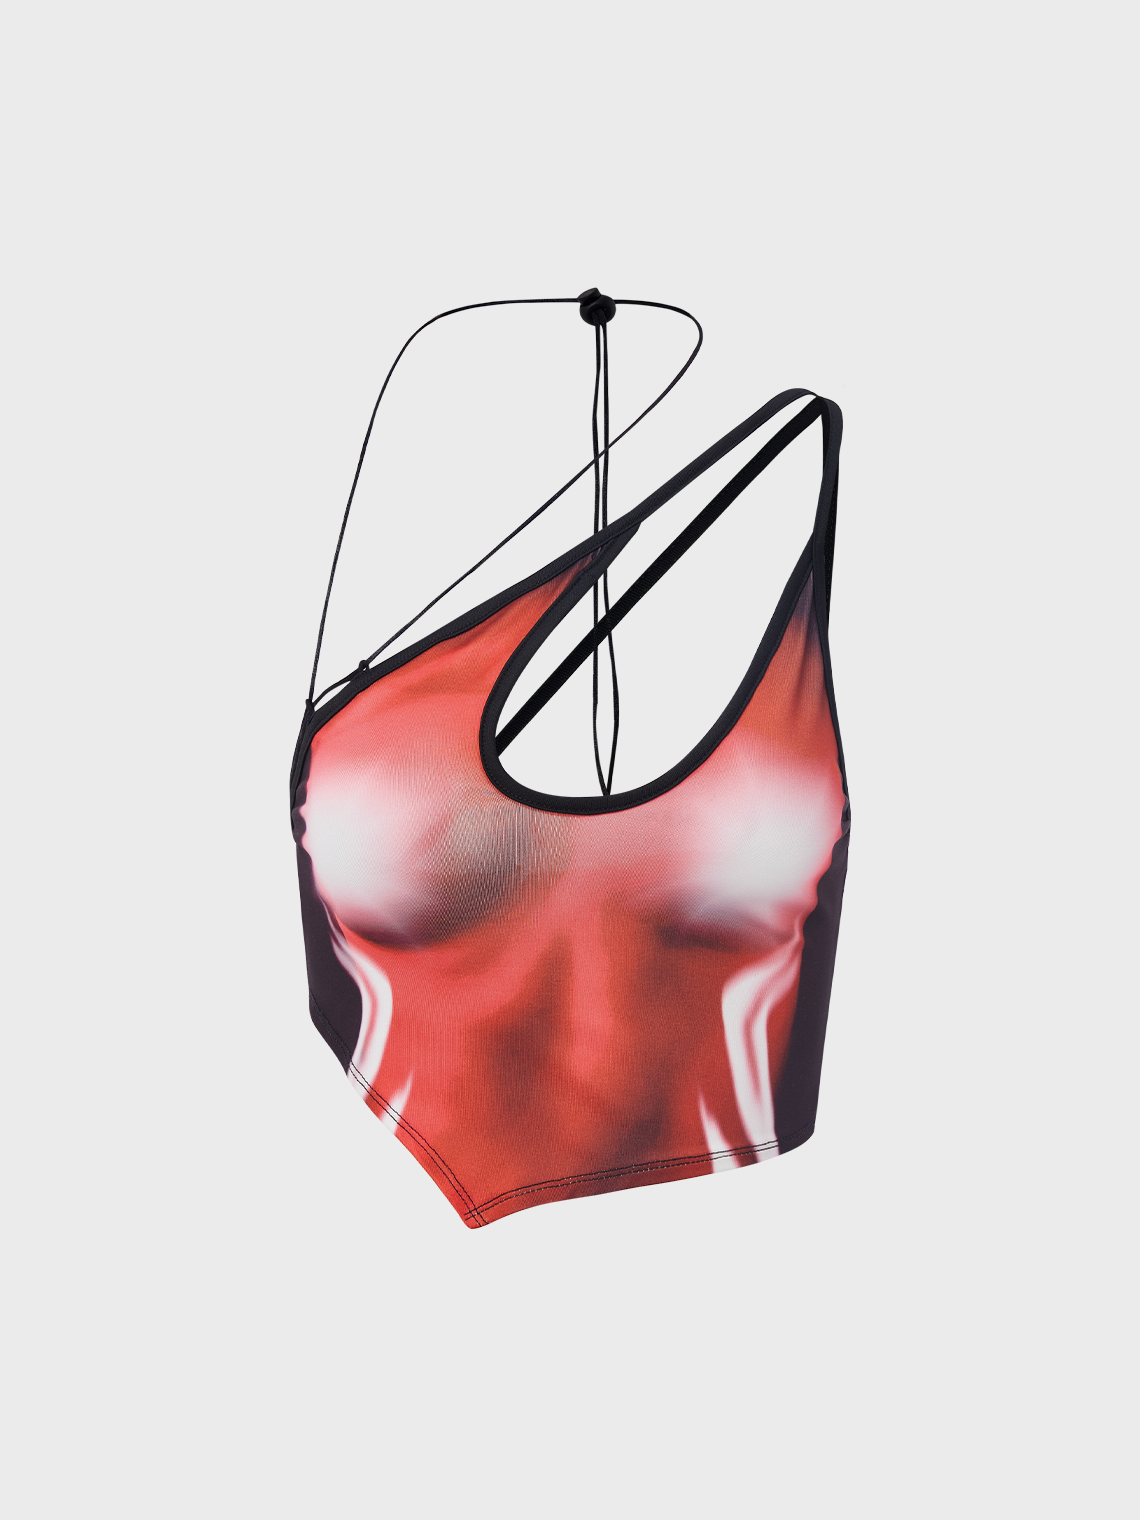 【Final Sale】Edgy Red Body print Asymmetrical design Cut out Top Tank Top & Cami